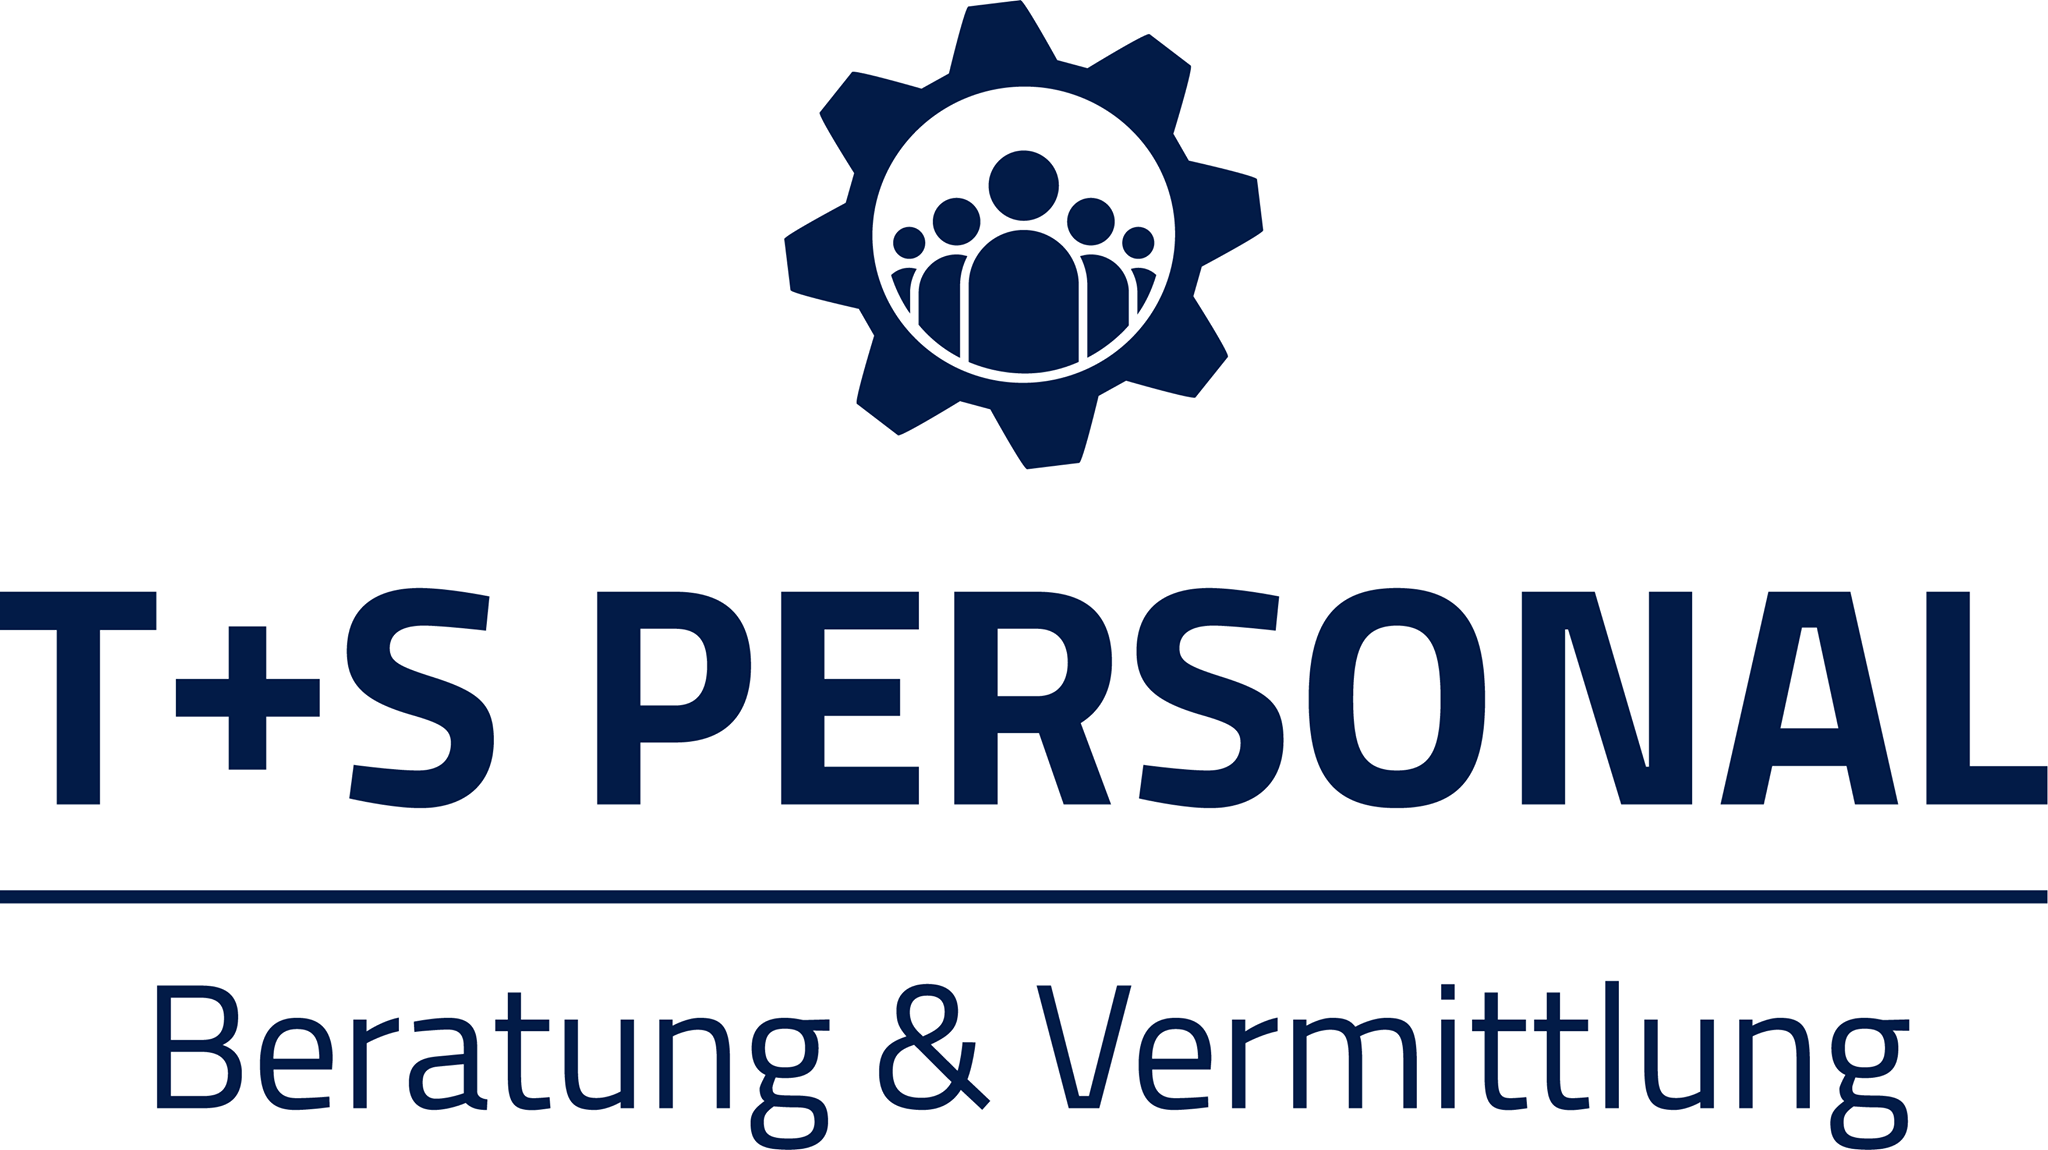 T+S Personal GmbH